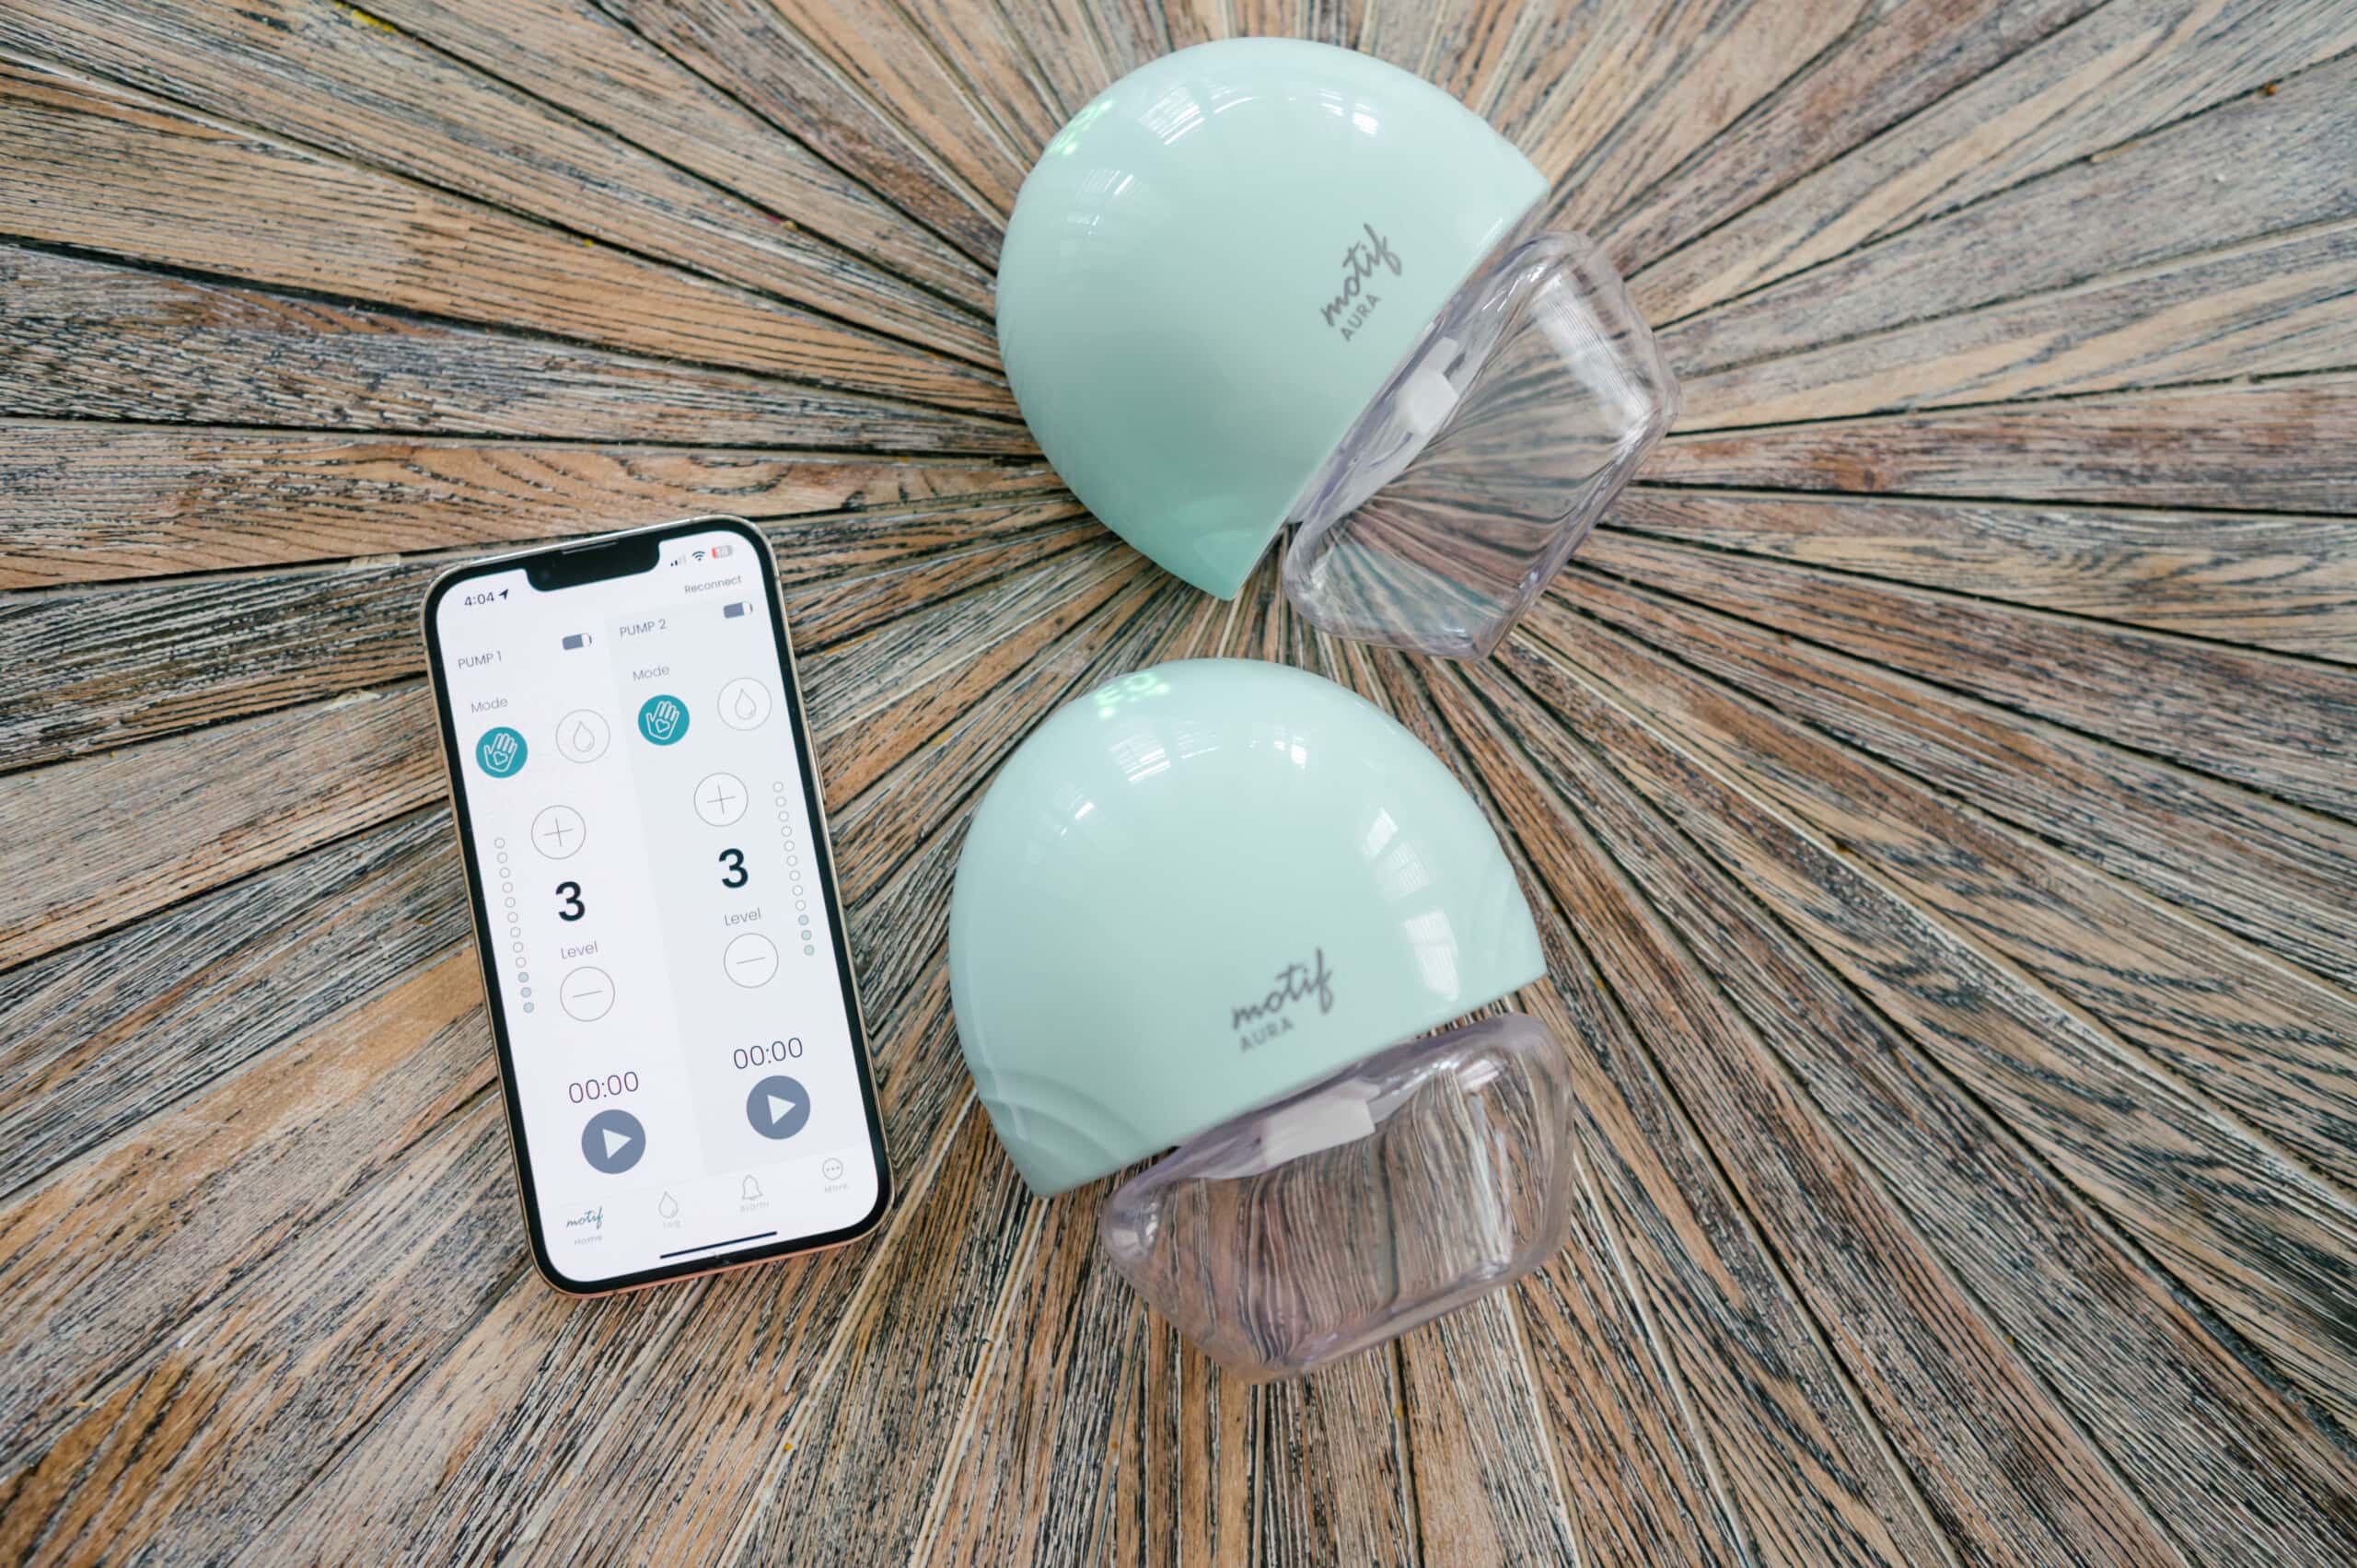 Motif Aura breast pumps on a wooden backdrop next to a smartphone with the Motif app on the screen